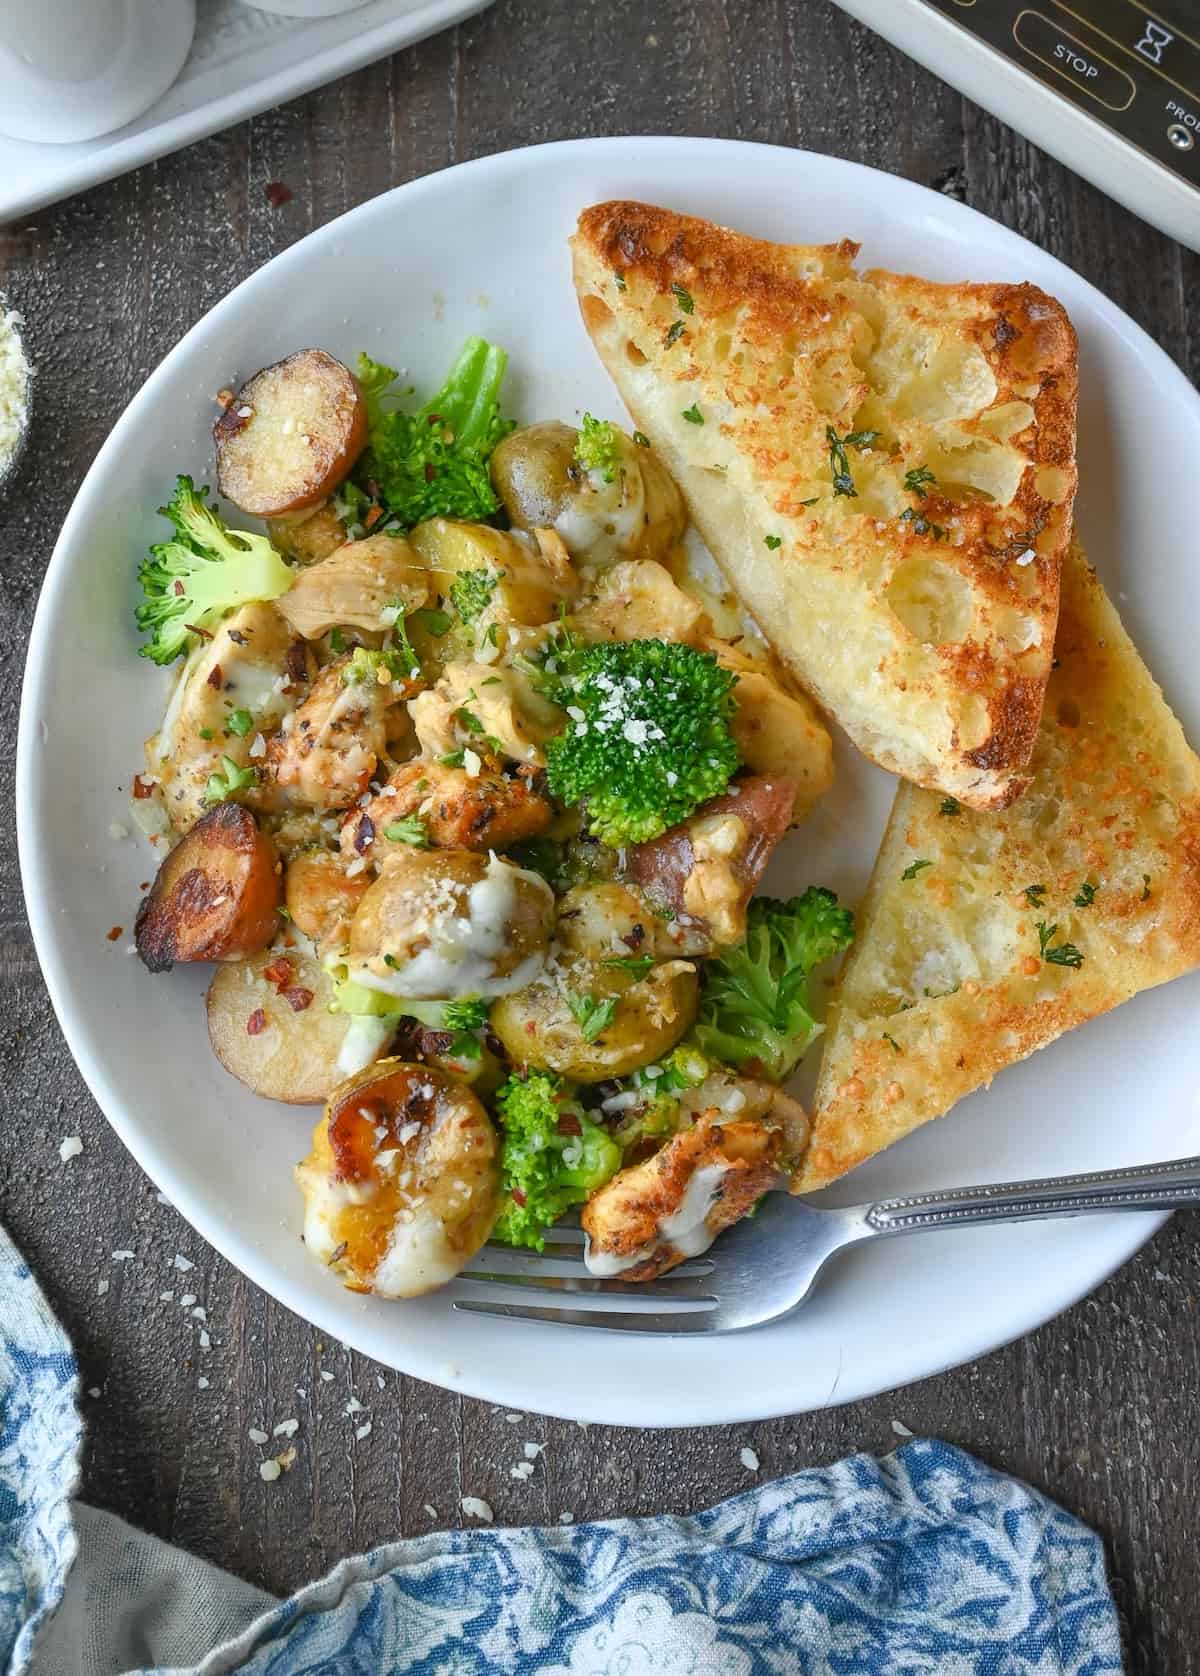 Slow cooker garlic parmesan chicken and potatoes on a plate with garlic bread.